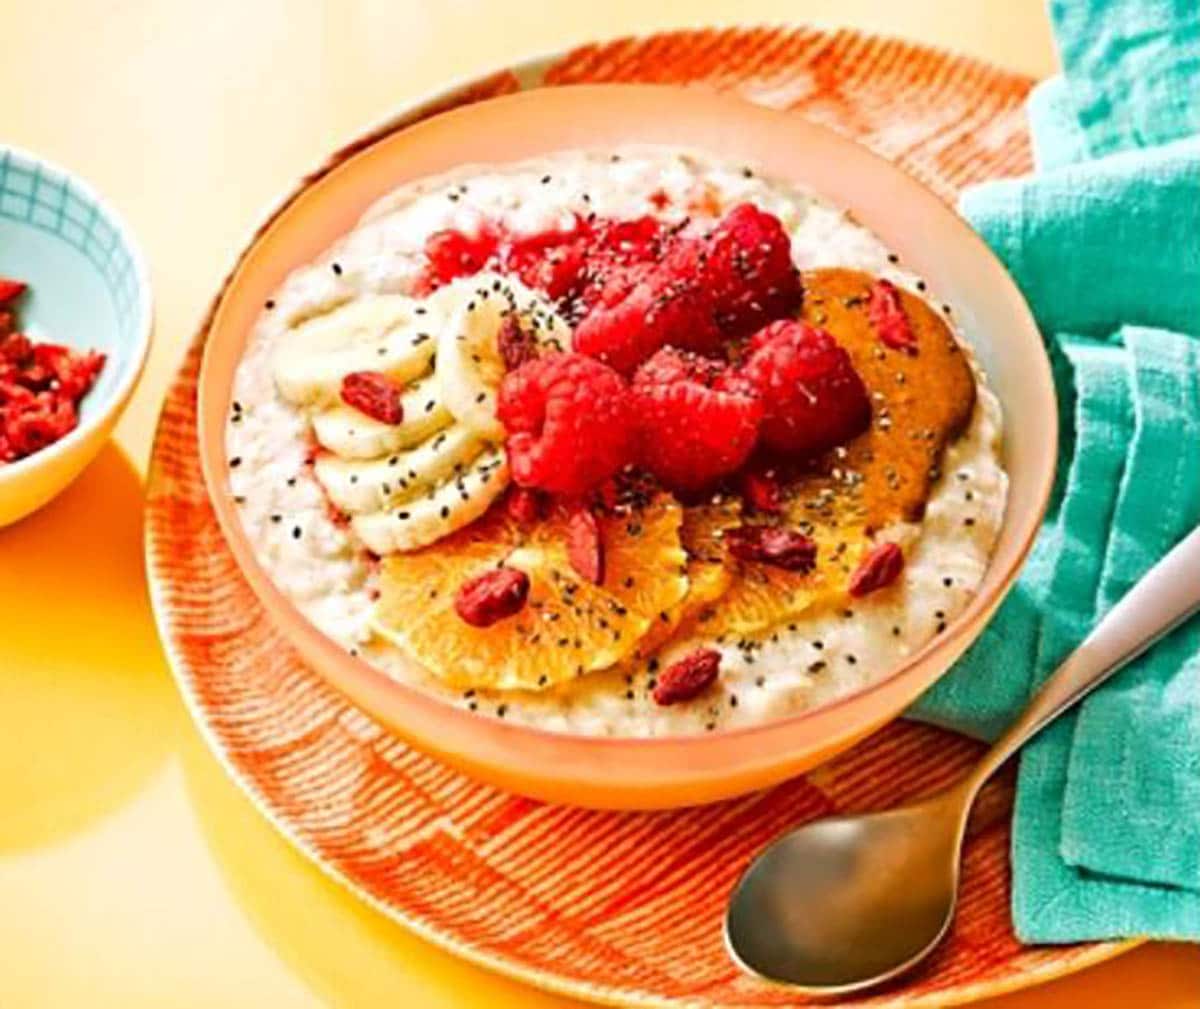 Oatmeal Bowl topped with sliced banana, raspberries and orange slices